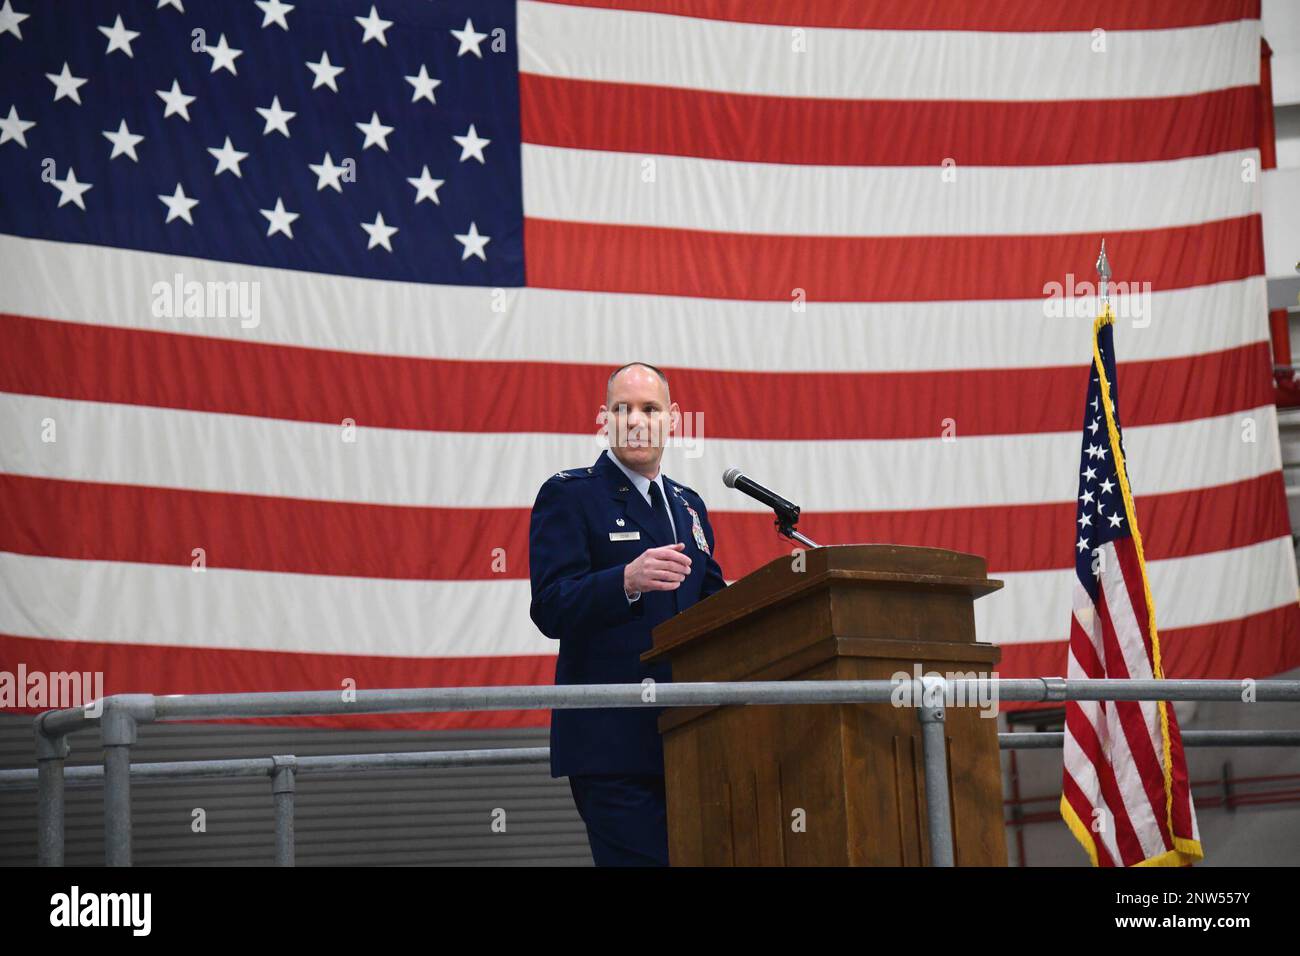 U.S. Air Force Col. Edward W. Cook Jr., the outgoing Commander of the 105th Mission Support Group, delivers a speech during the 105th MSG change of command ceremony at Stewart Air National Guard Base, New York, January 8, 2023. Stock Photo